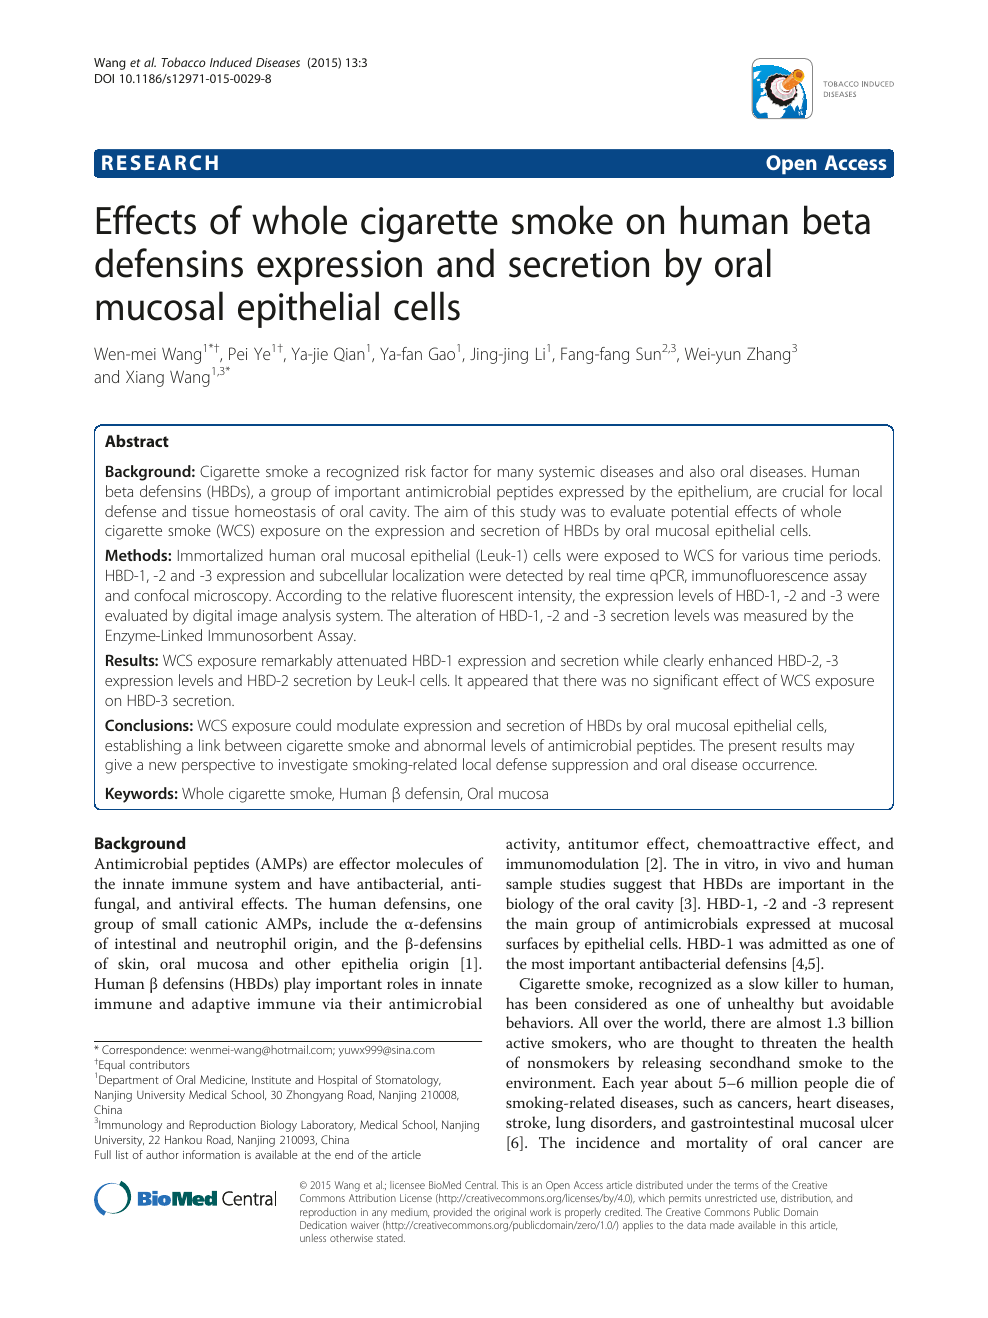 Effects Of Whole Cigarette Smoke On Human Beta Defensins Expression And Secretion By Oral Mucosal Epithelial Cells Topic Of Research Paper In Veterinary Science Download Scholarly Article Pdf And Read For